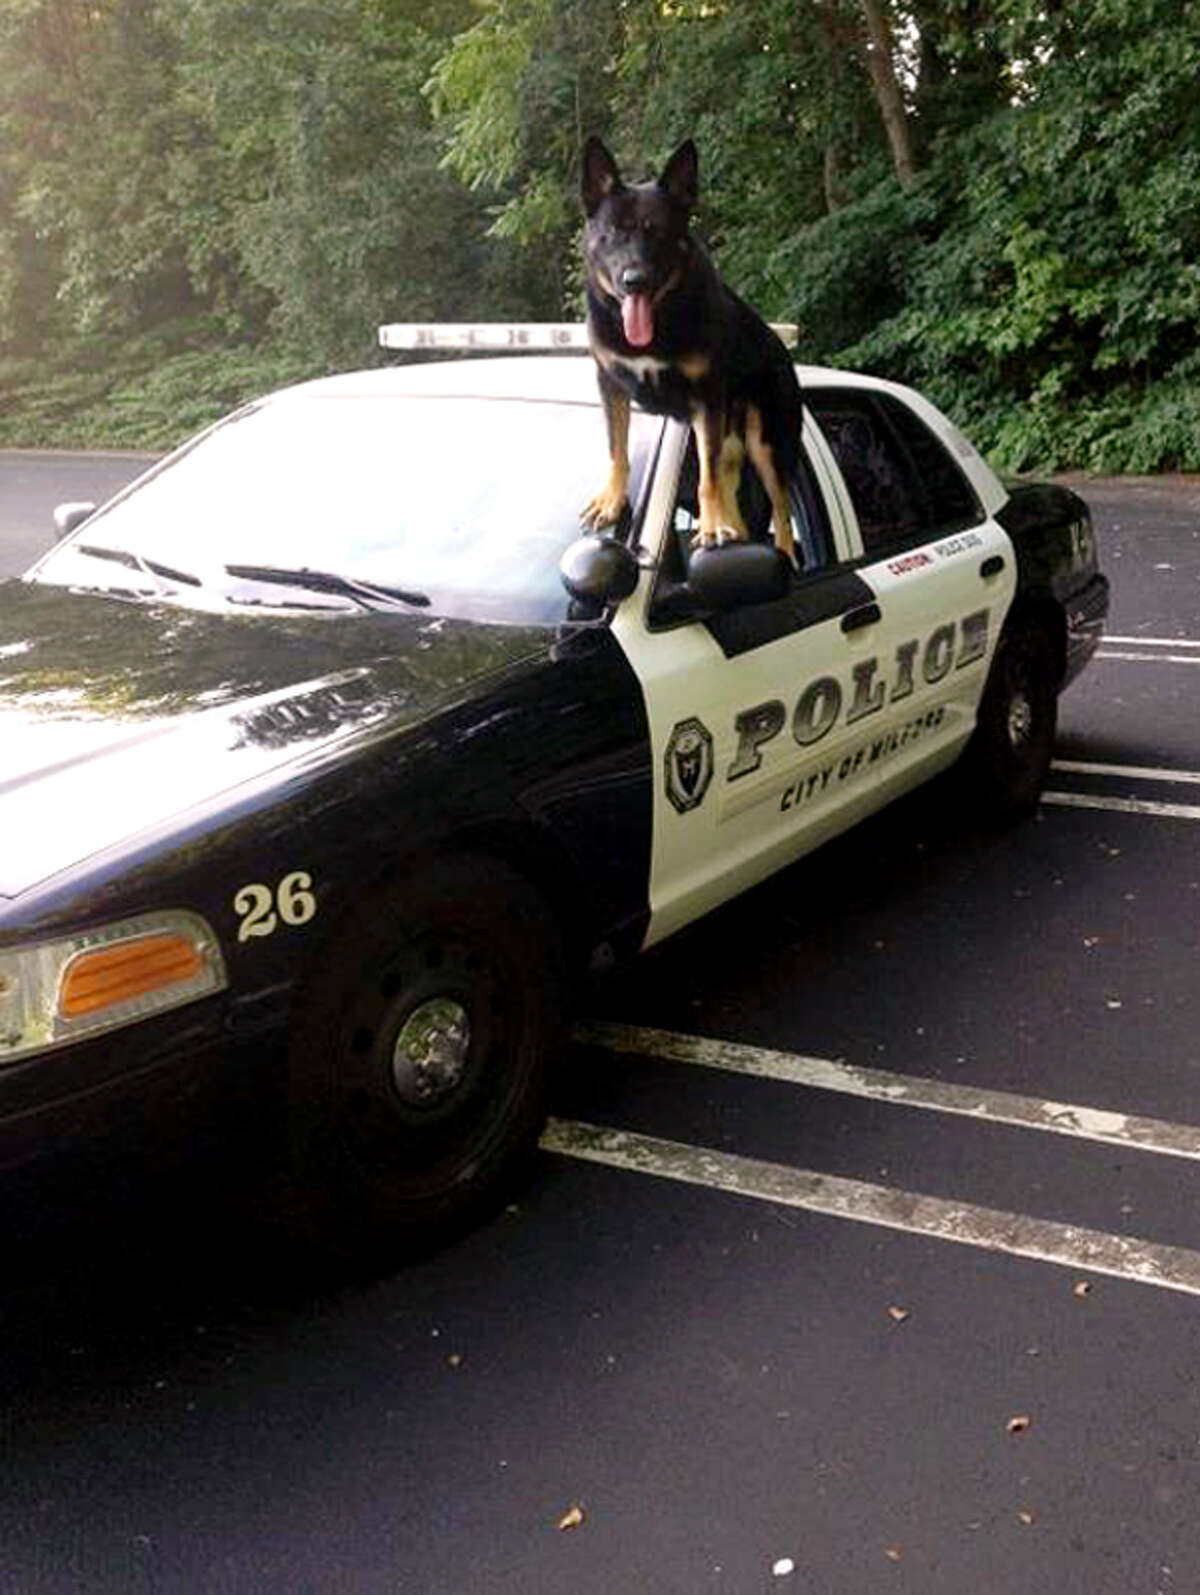 File photo (2013): The Milford Police Department's K9 Diesel will be getting a ballistic vest thanks to a nonprofit organization, Vested Interest in K9s, Inc. which is a Massachusetts based nonprofit organization and Armor Express, a Michigan based manufacturer. K9 Diesel is certified as a patrol canine, completing several criminal apprehensions, evidence recovery and successful tracks for people of interest.